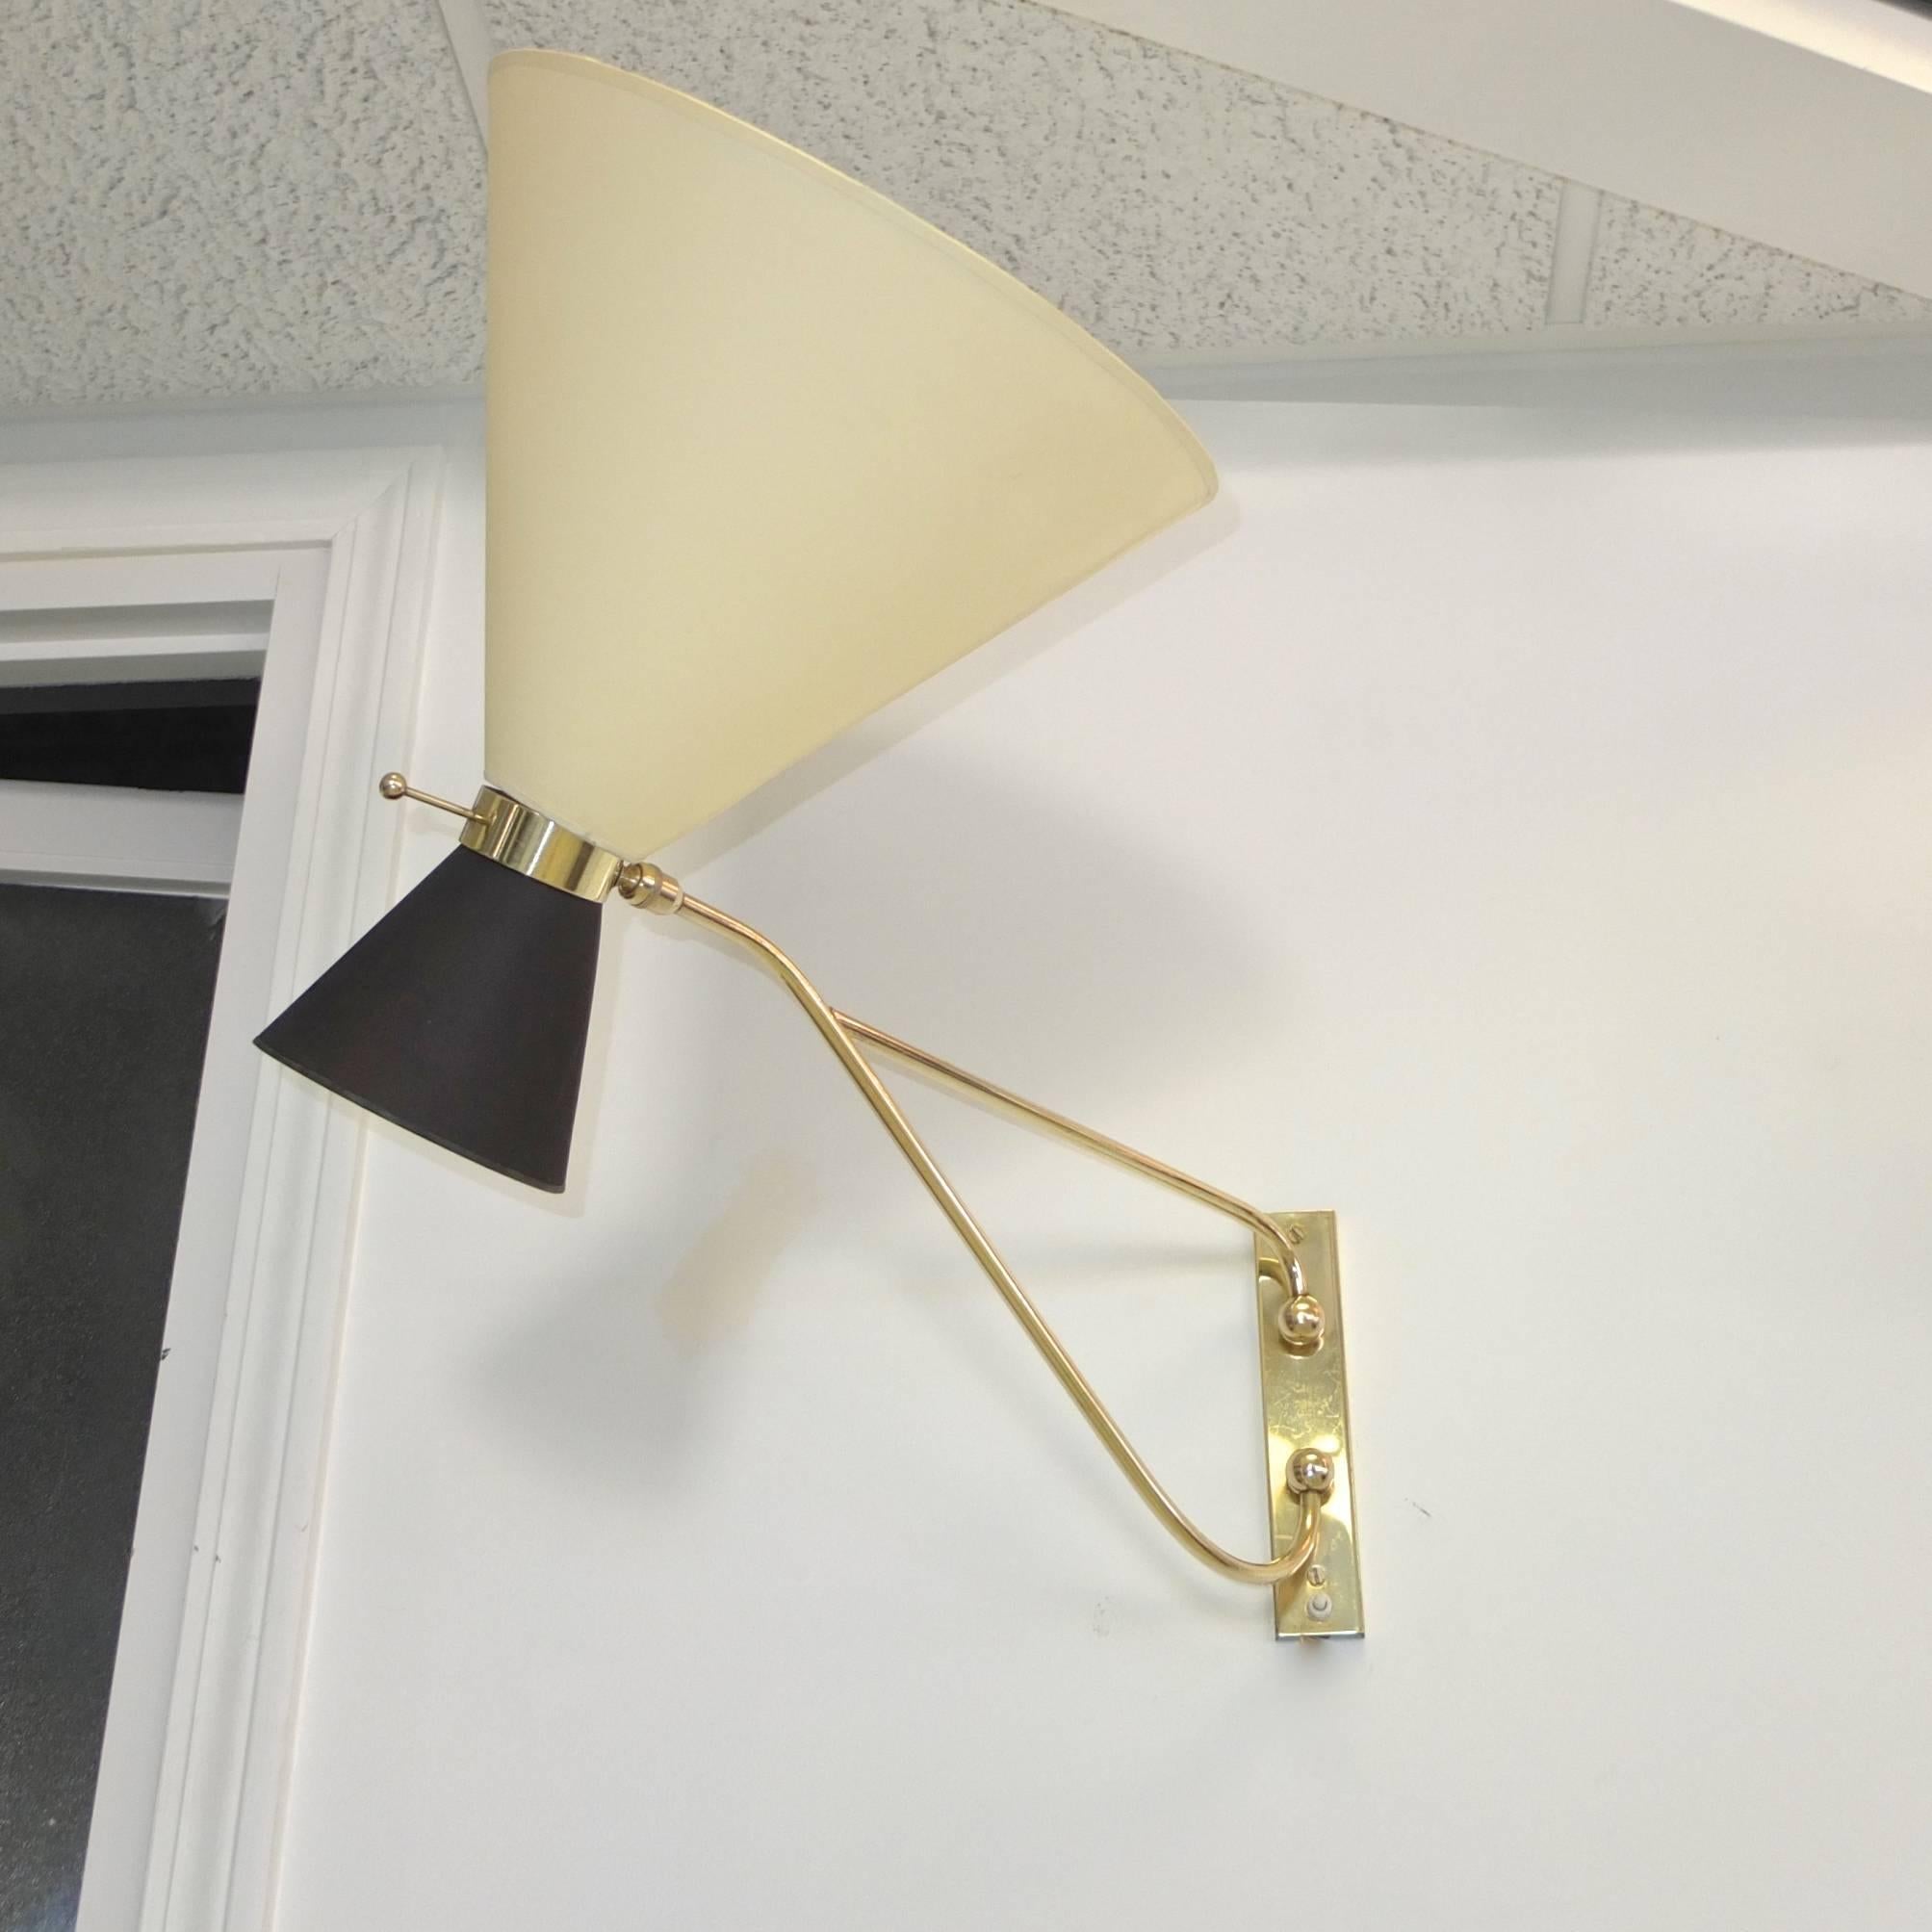 Solid brass high quality French 1950s swing arm wall lamp. Swings left to right 180 degrees. Double socket (up and down) in brass collar on a swivel joint which gives the lamp heads extensive movability.

Shown here with a two-tone diabolo shade